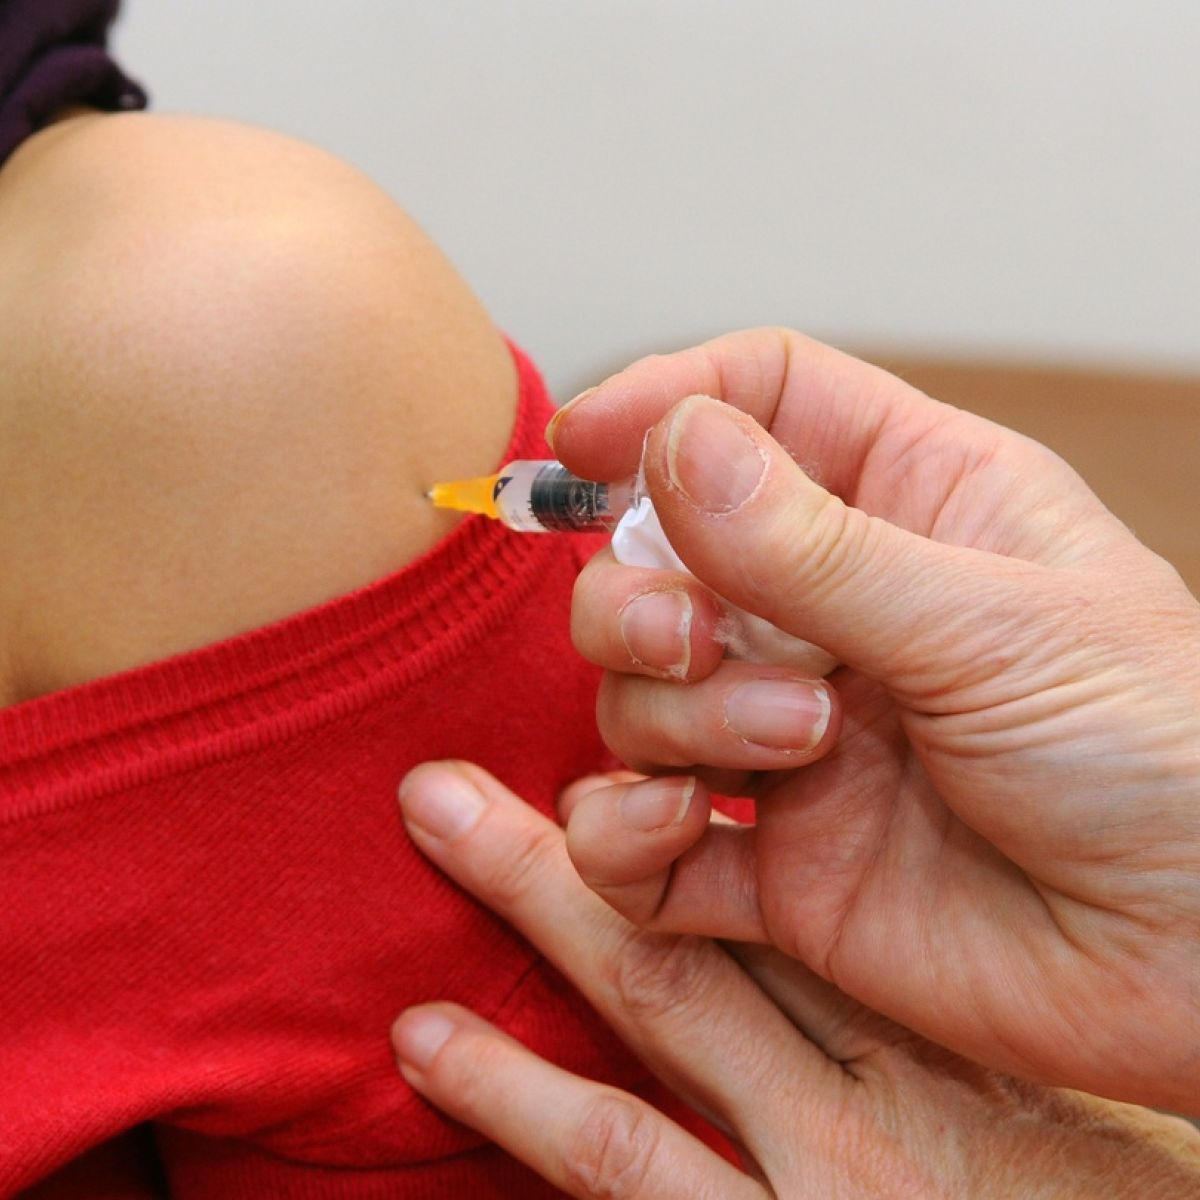 hpv vaccine side effects back pain